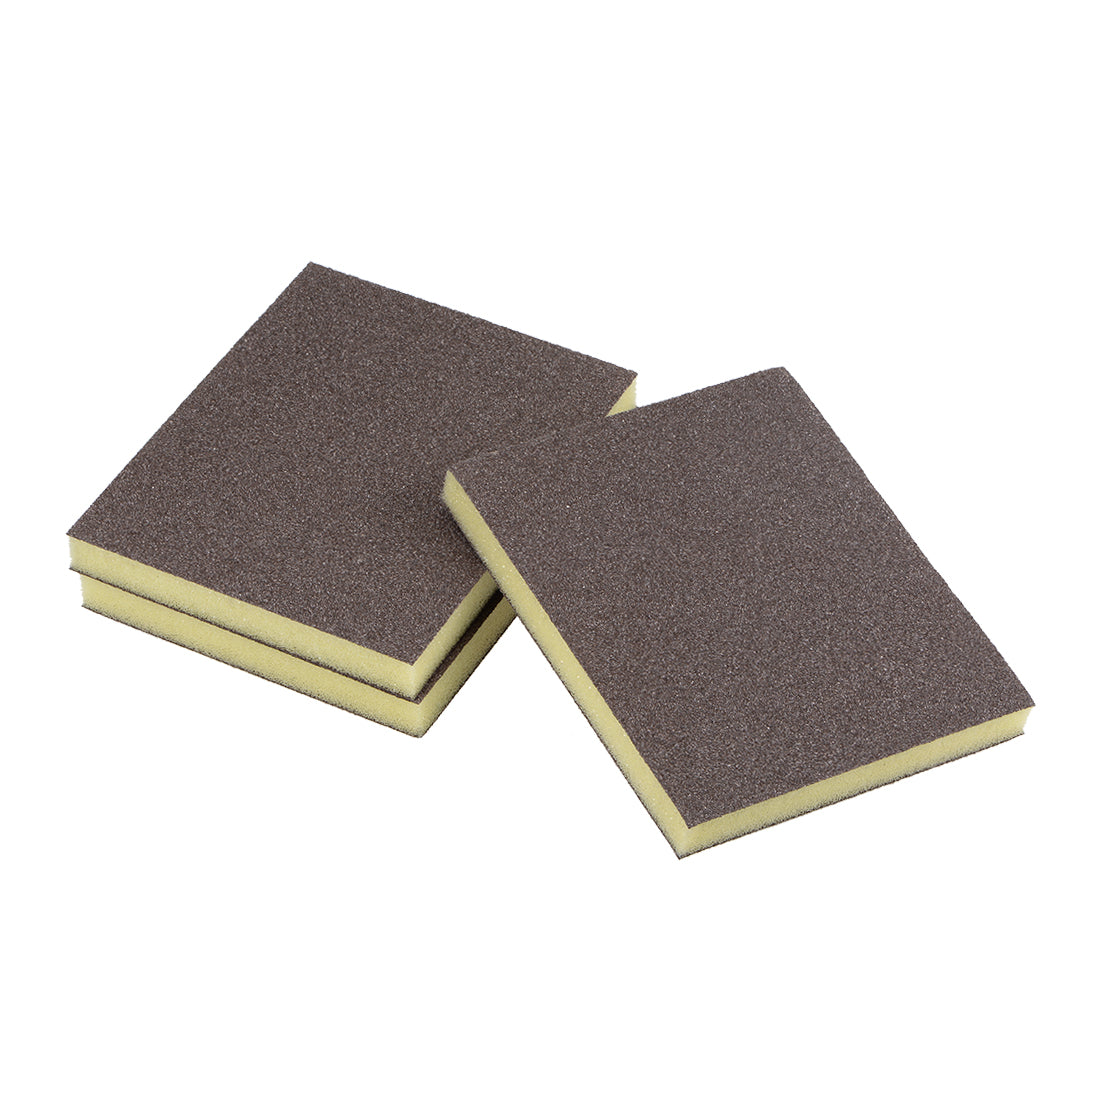 uxcell Uxcell Sanding Sponge 80 Grit Sanding Block Pad 4.7inch x 3.9inch x 0.4inch Brown 3pcs